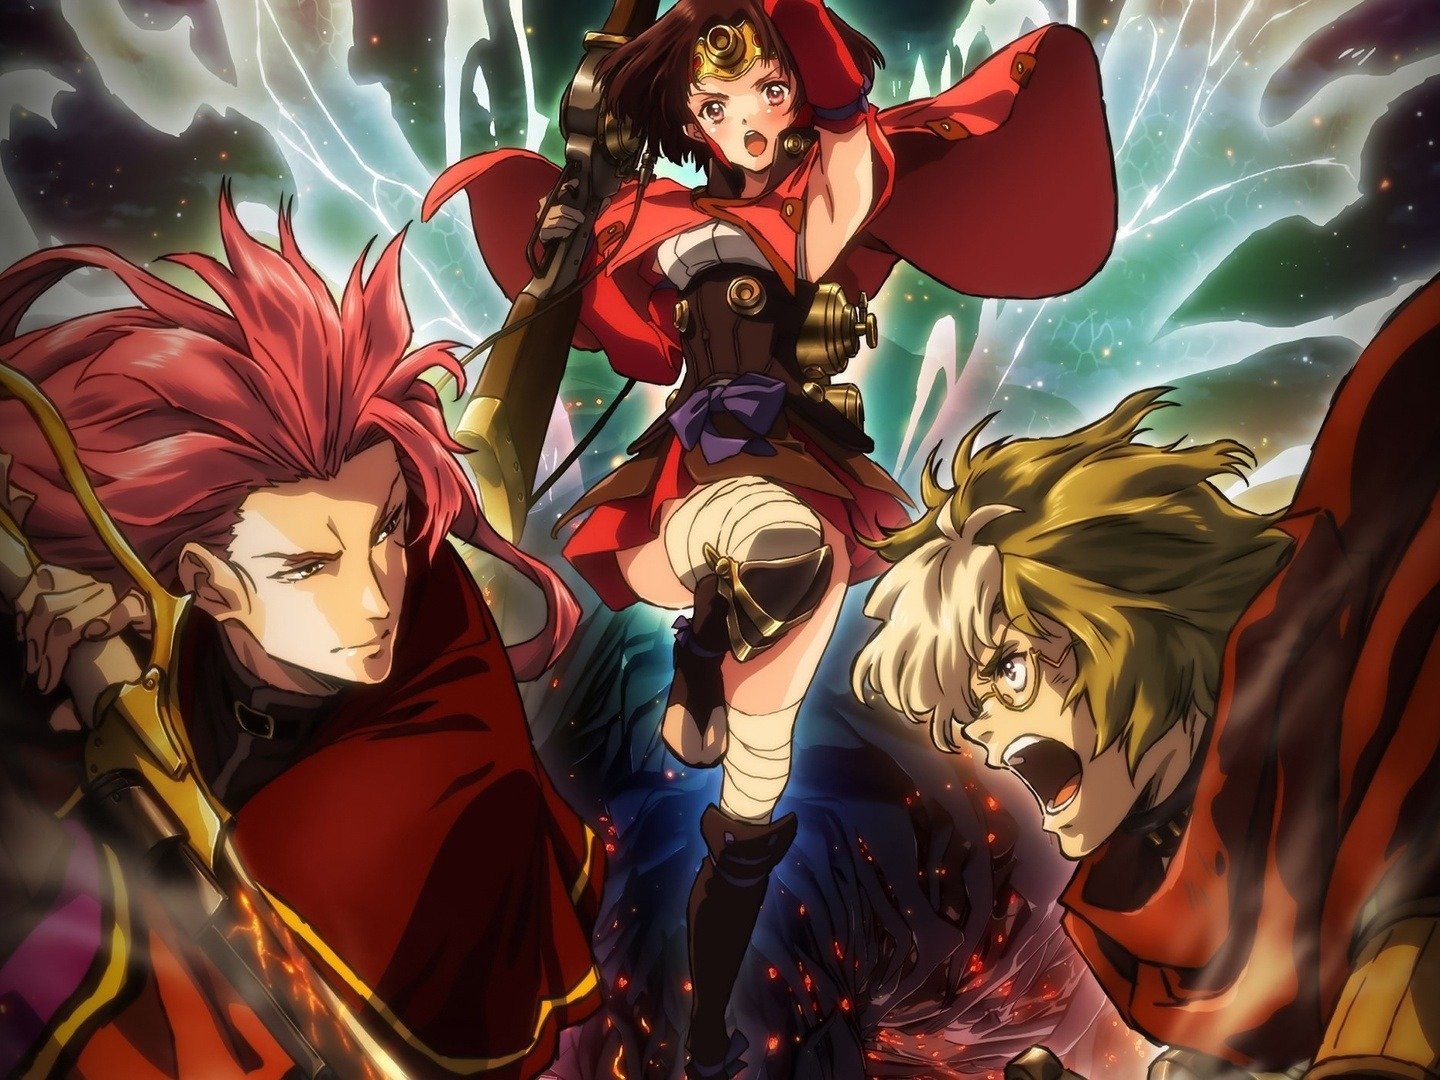 Kabaneri of the Iron Fortress - streaming online